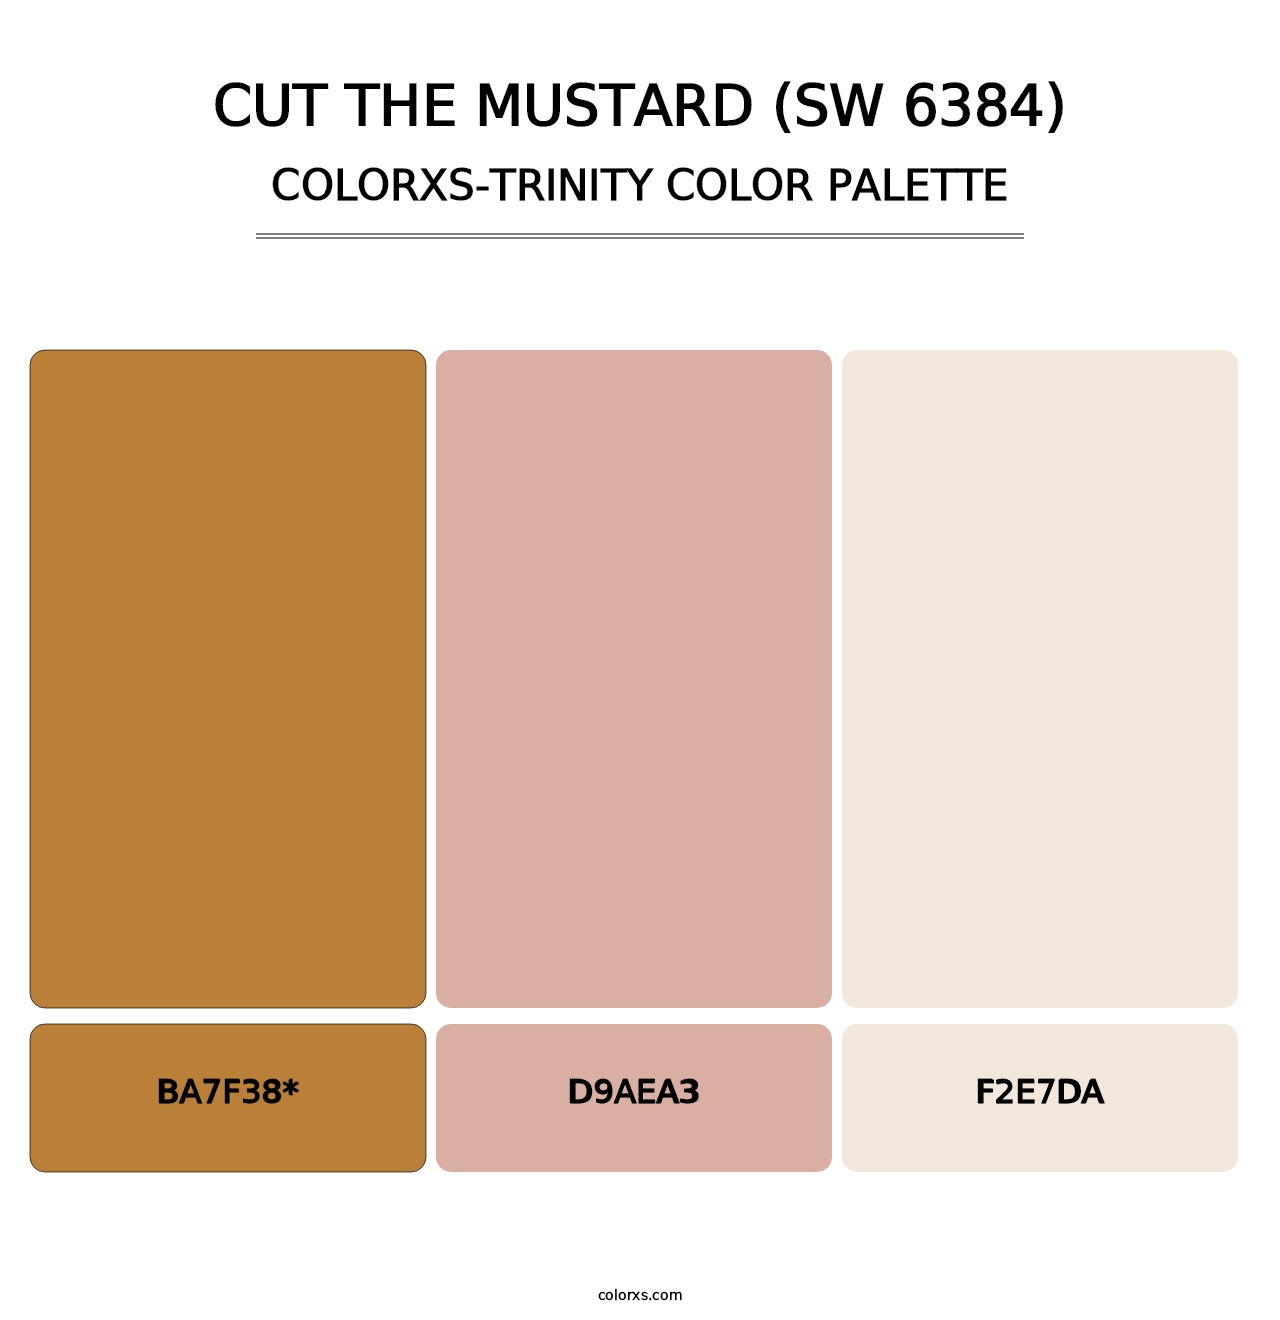 Cut the Mustard (SW 6384) - Colorxs Trinity Palette